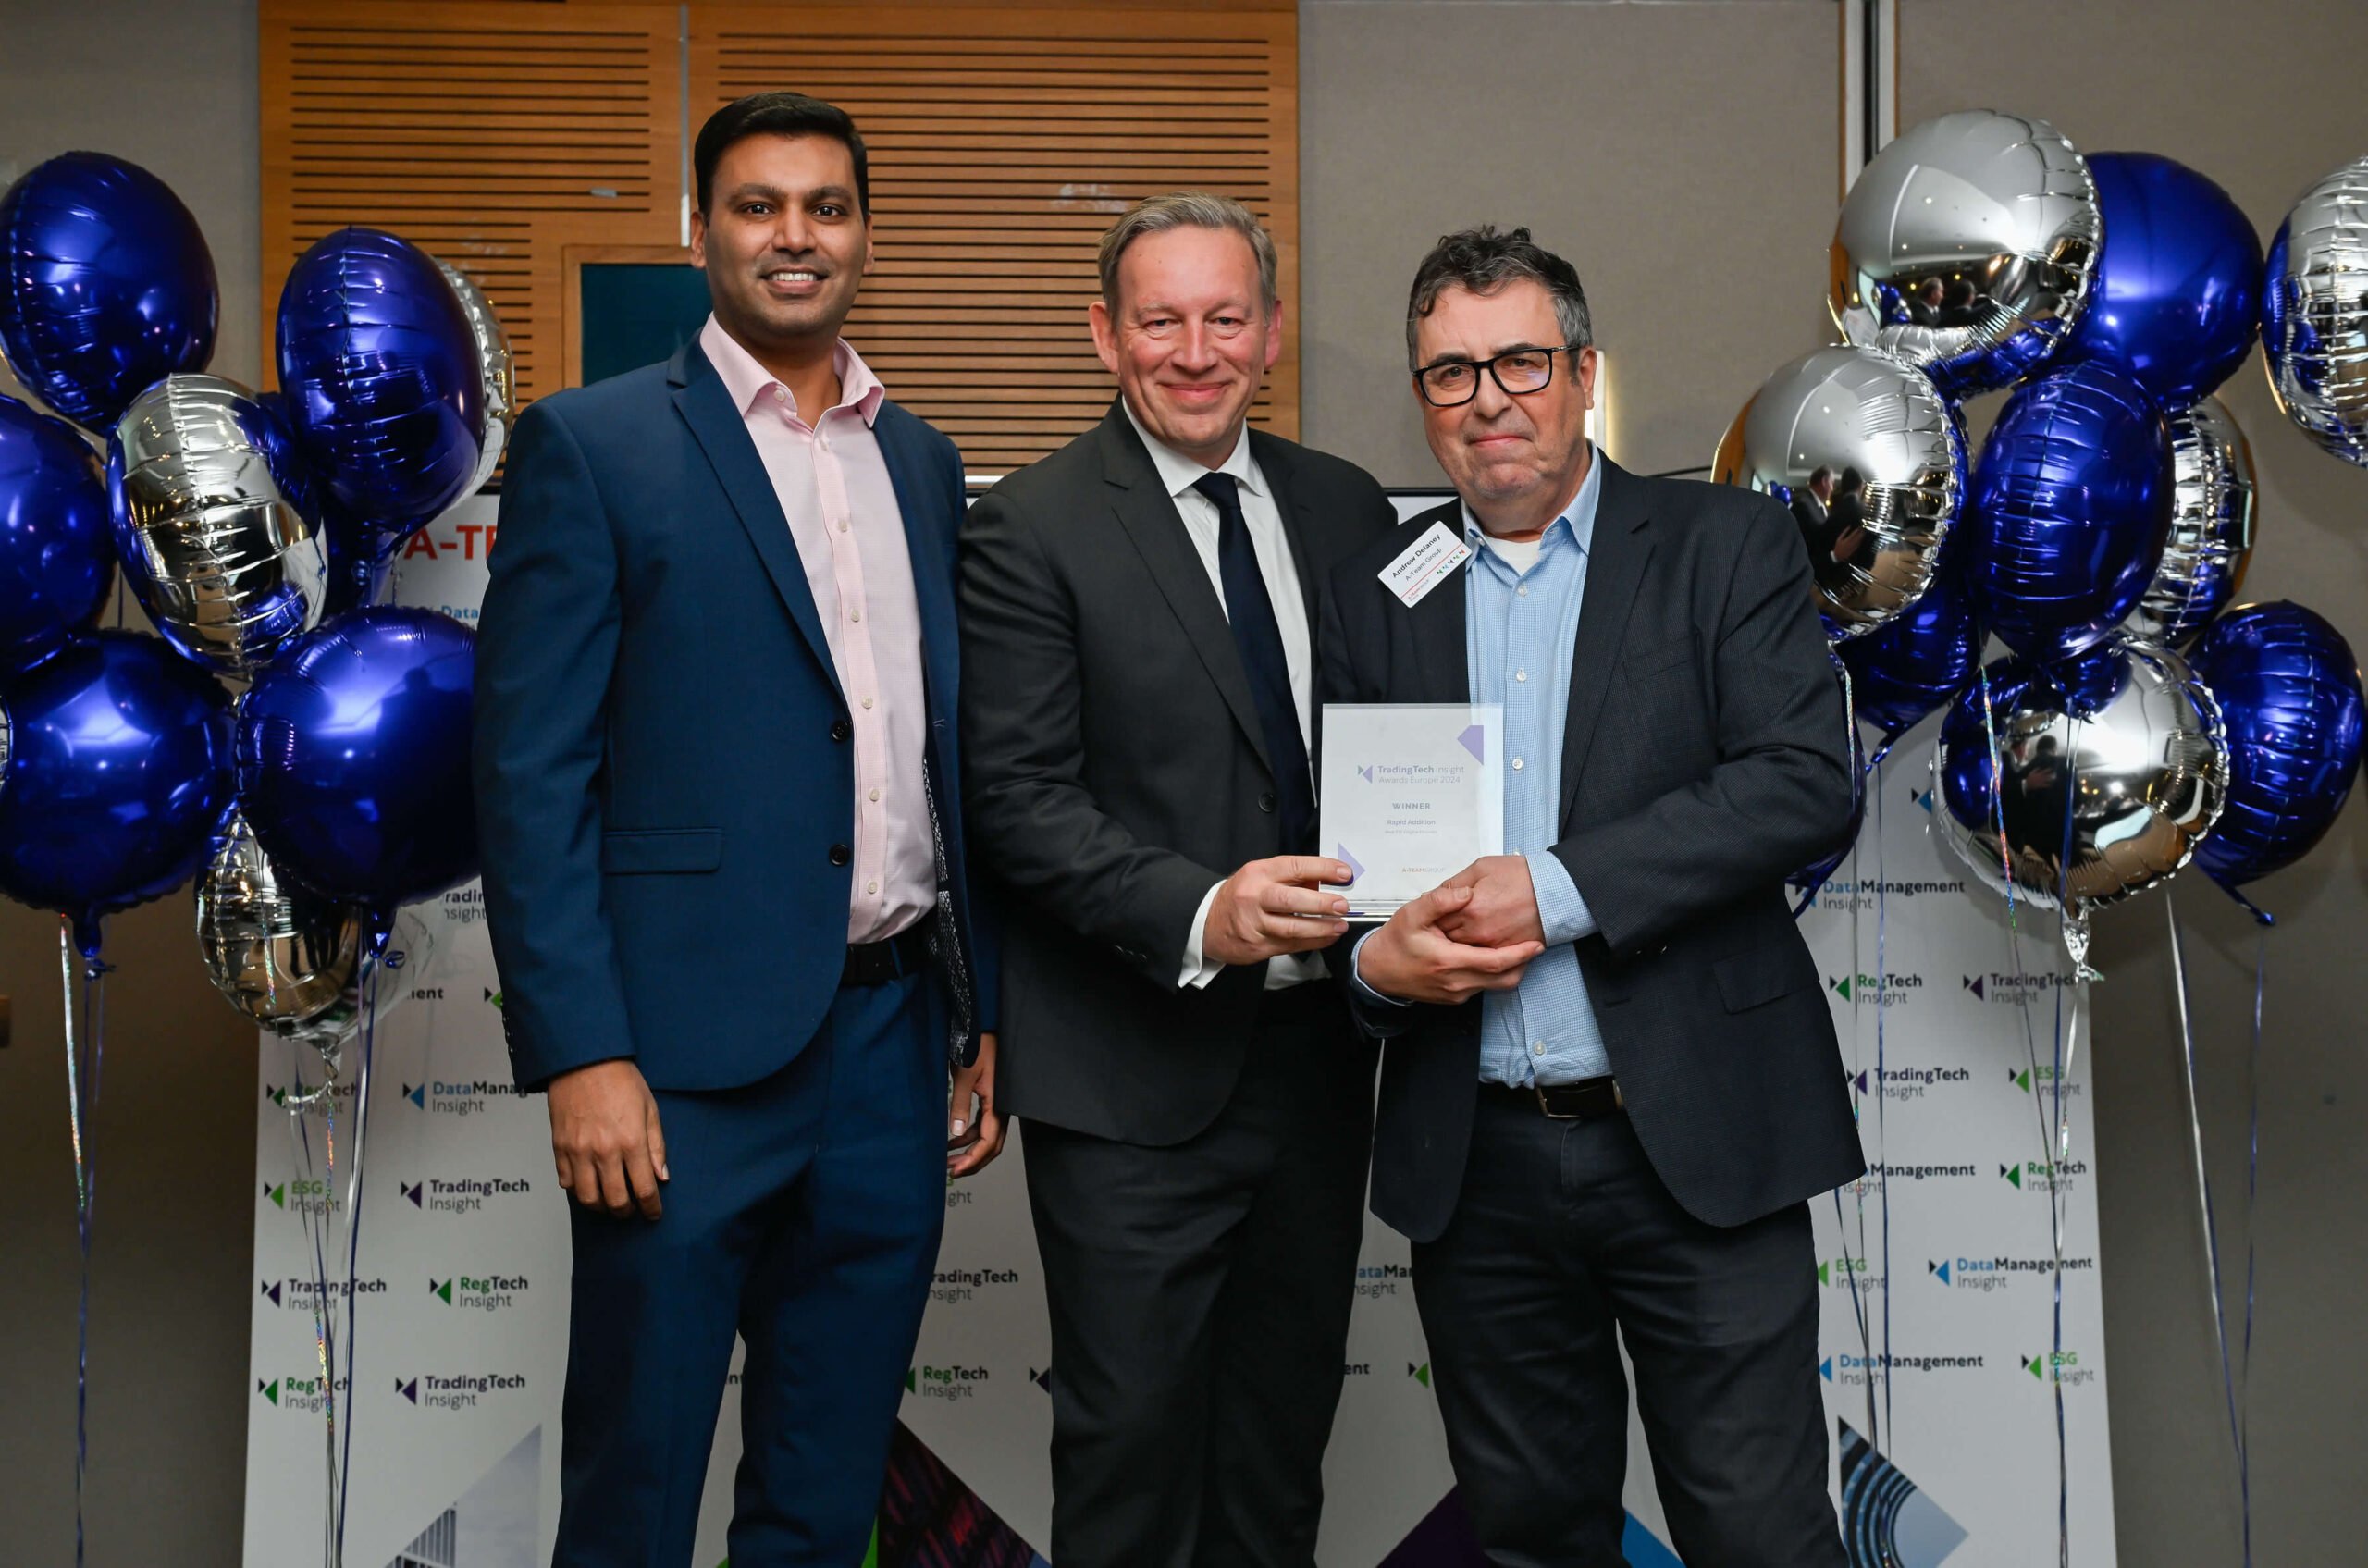 Rapid Addition CEO Mike Powell and CTO Deepak Dhayatker accepting the award for Best FIX Engine Provider from Andrew Delaney founder of A-Team